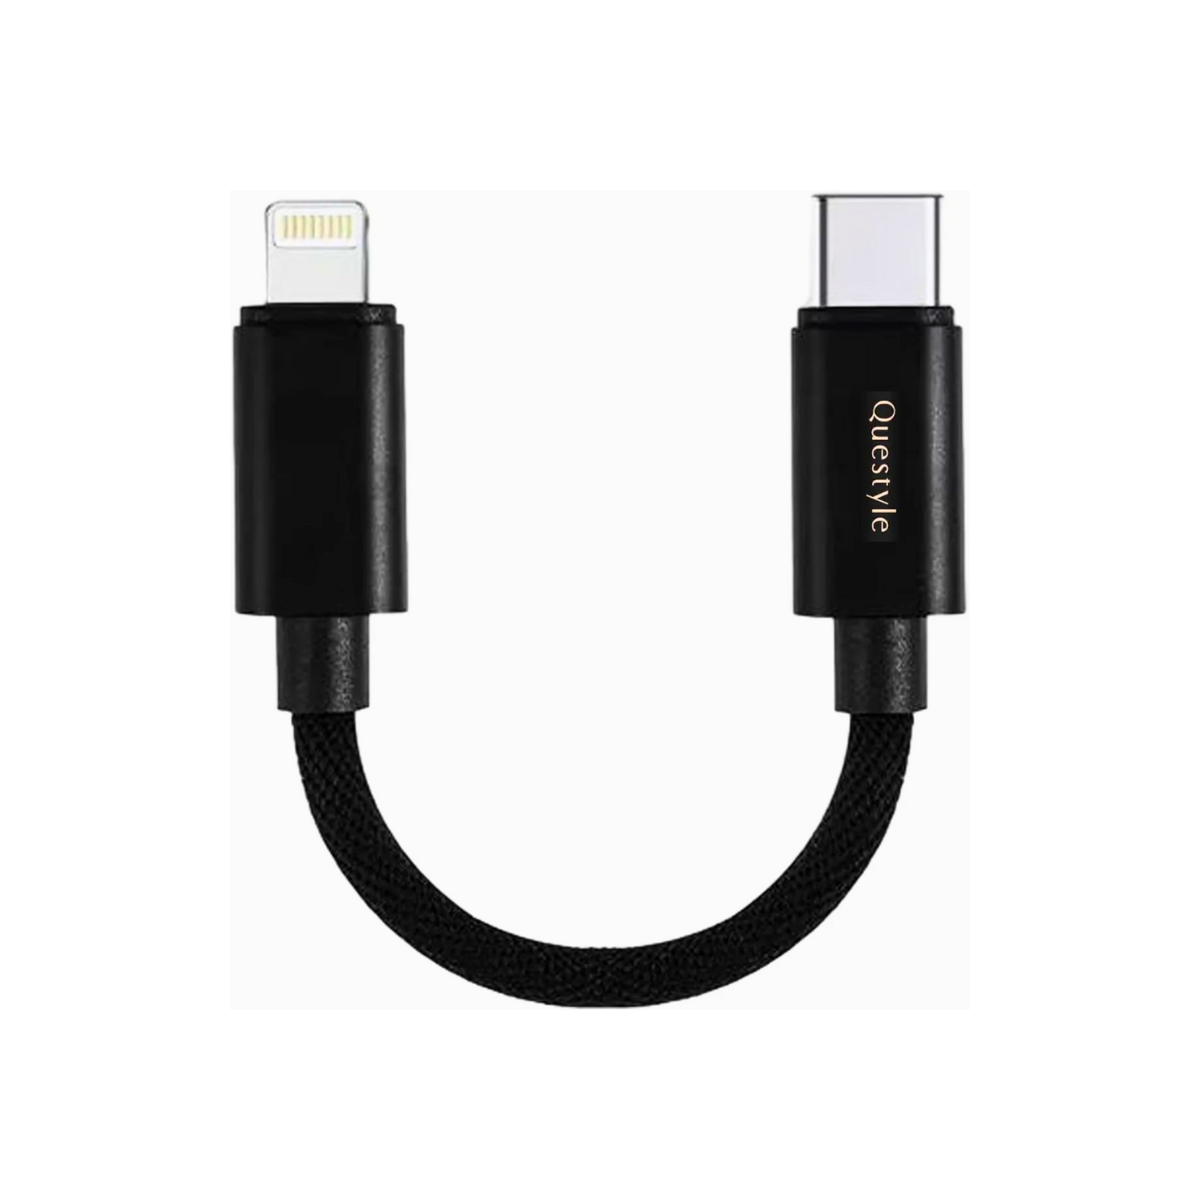 Questyle LTC02 Lightning To Type-C Cable